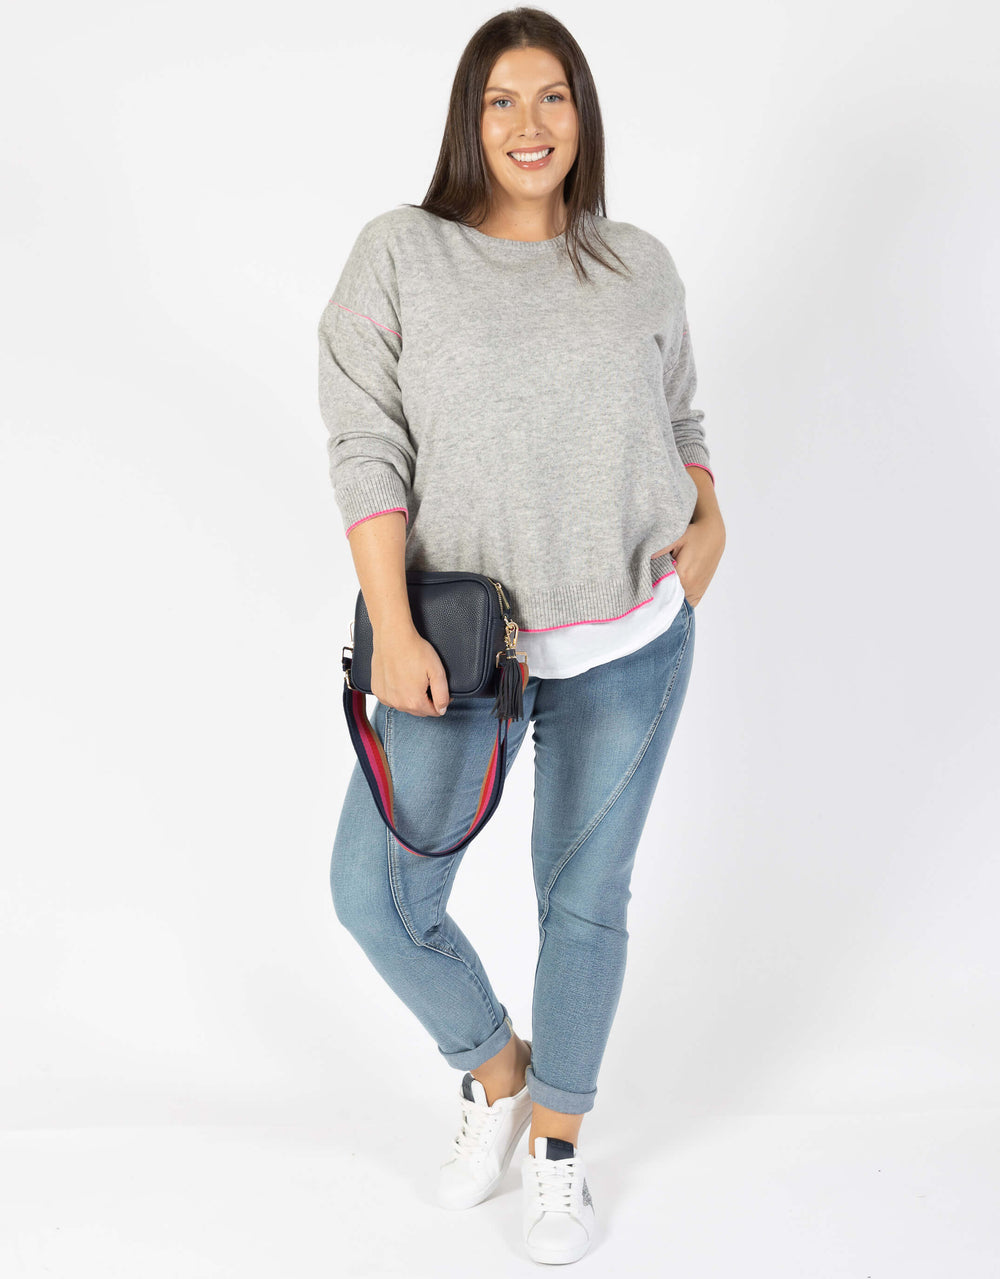 white-and-co-plus-size-tribeca-wool-knit-grey-womens-plus-size-clothing